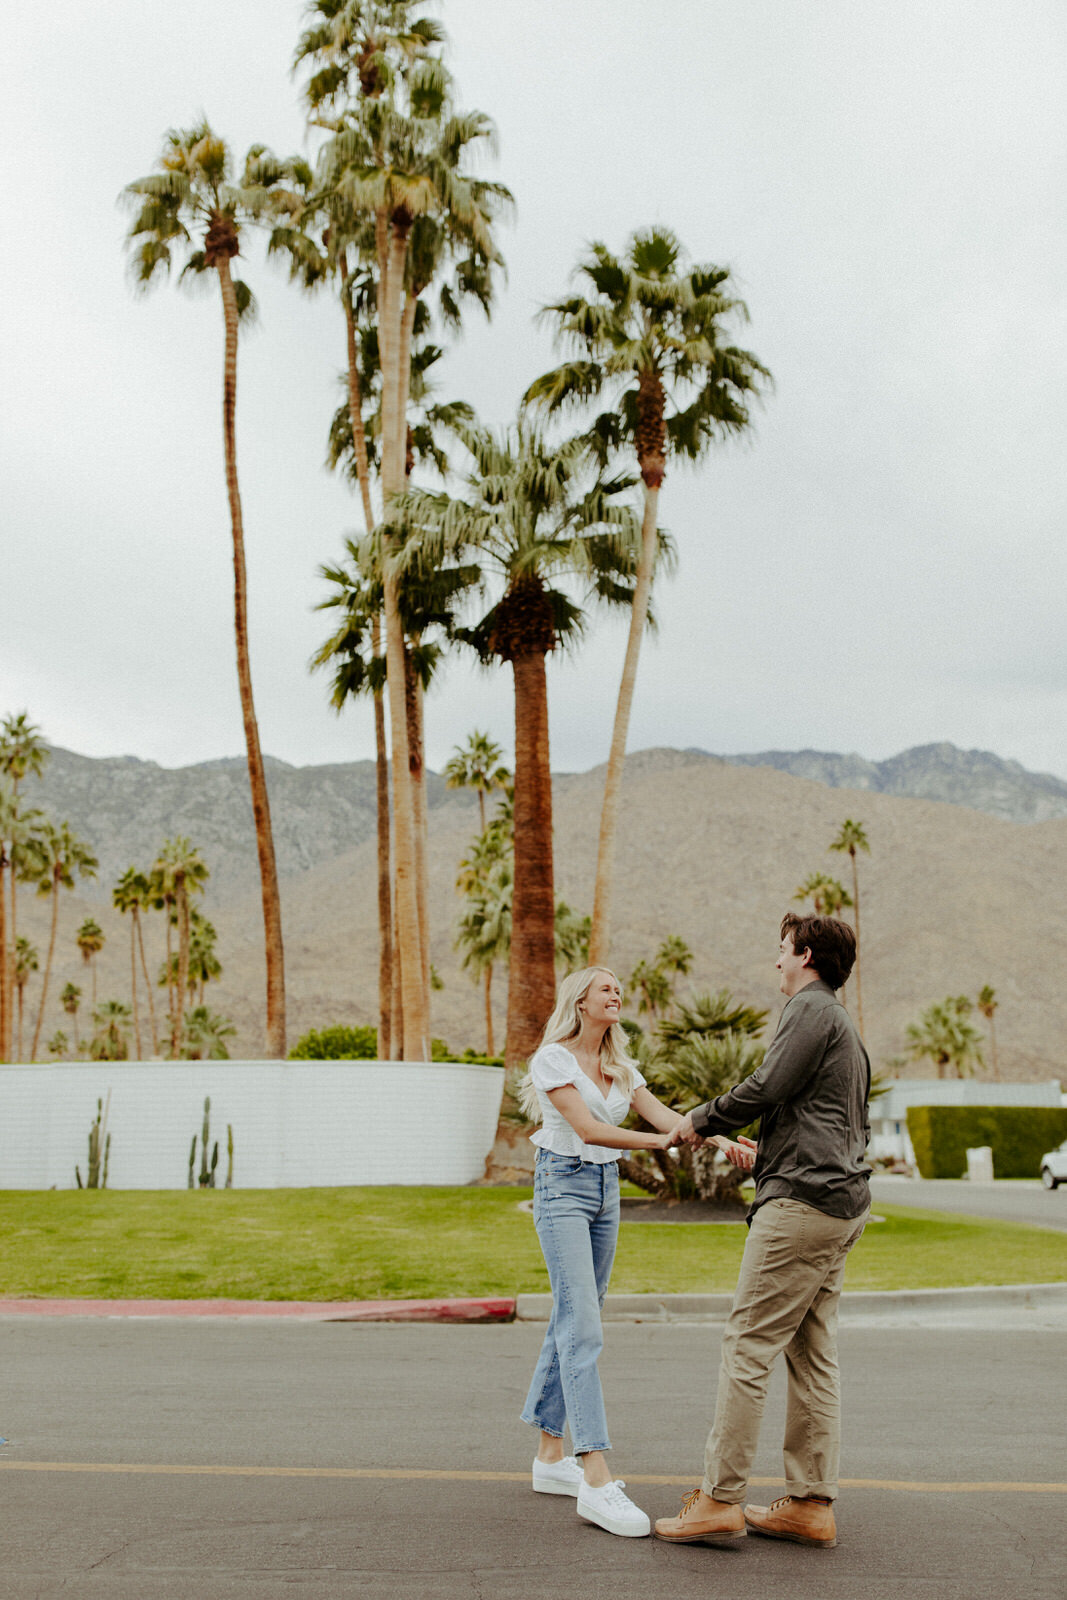 Brianna-Broyles-Photography-Pink-Palm-Springs-Engagement-Session-17.jpg